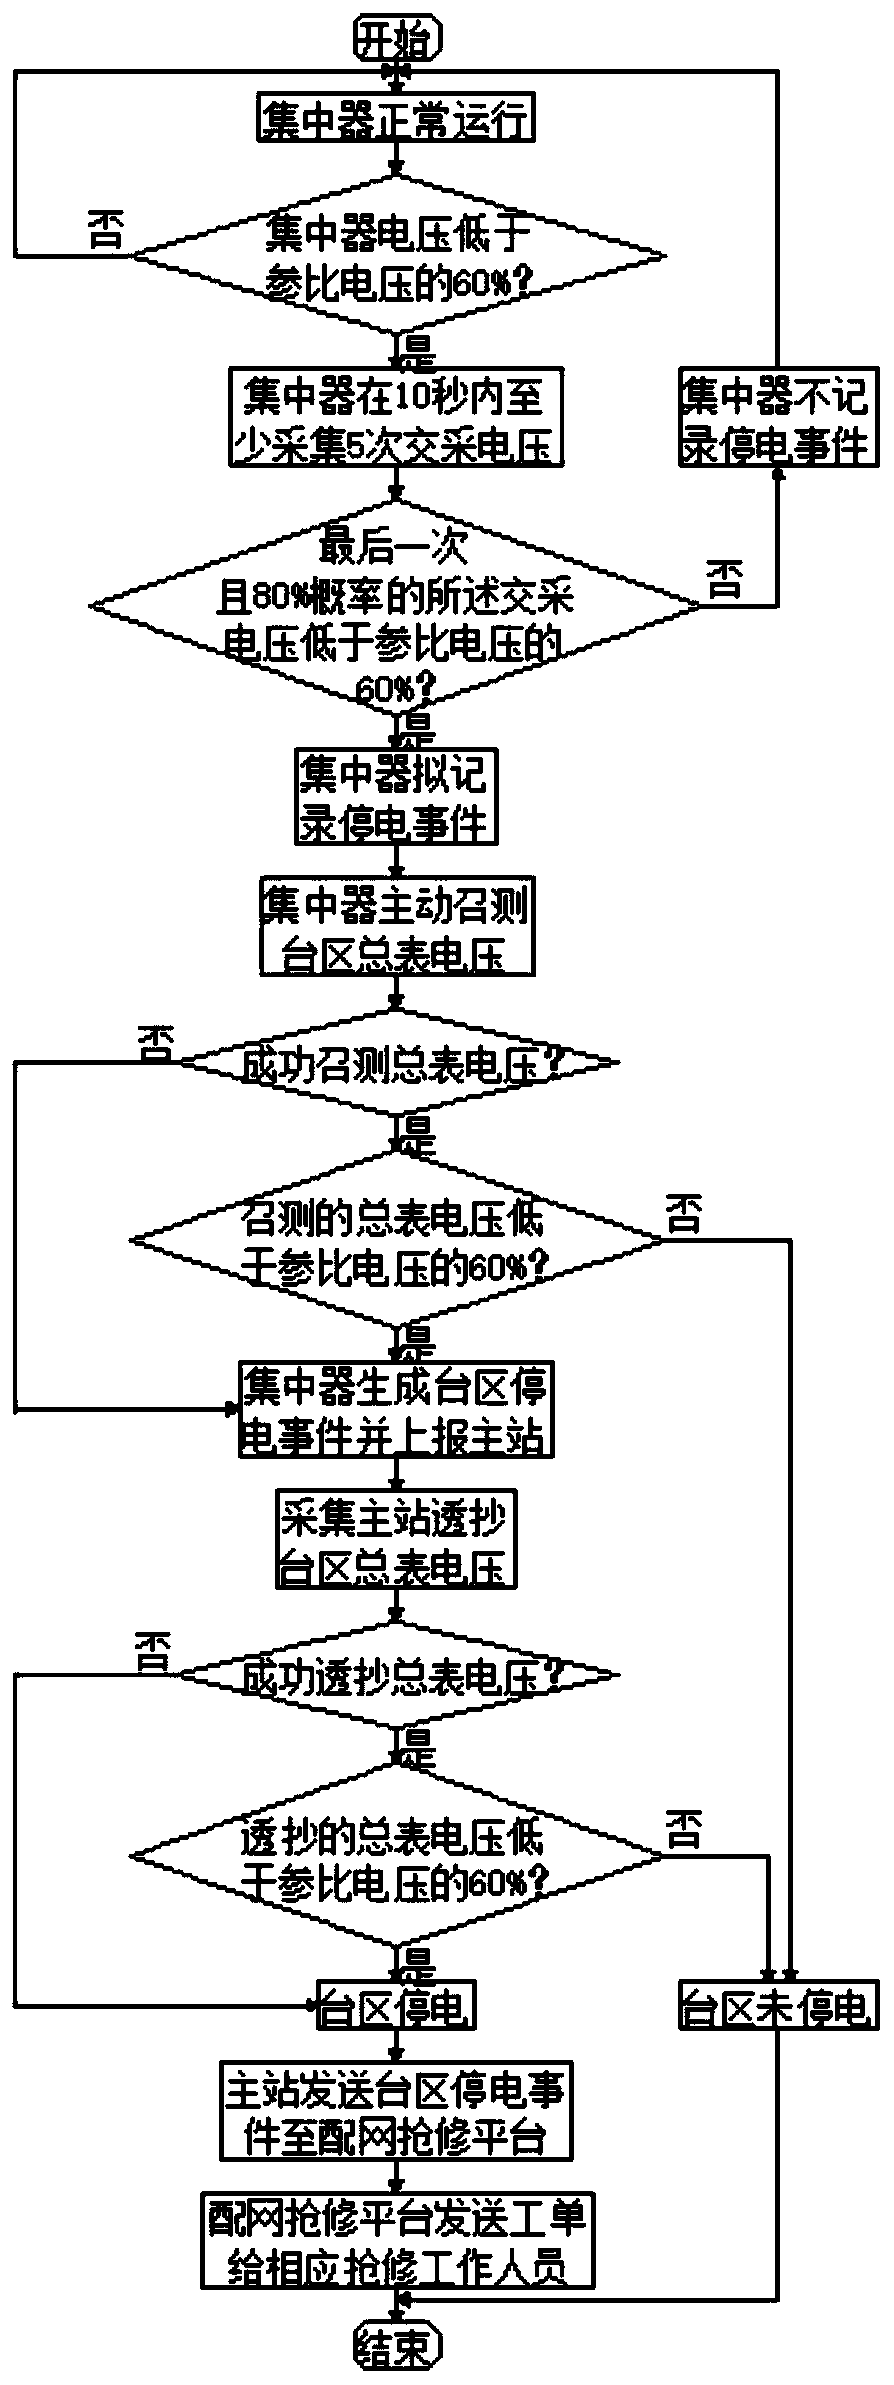 Optimization method for active reporting of power failure event concentrator in transformer area